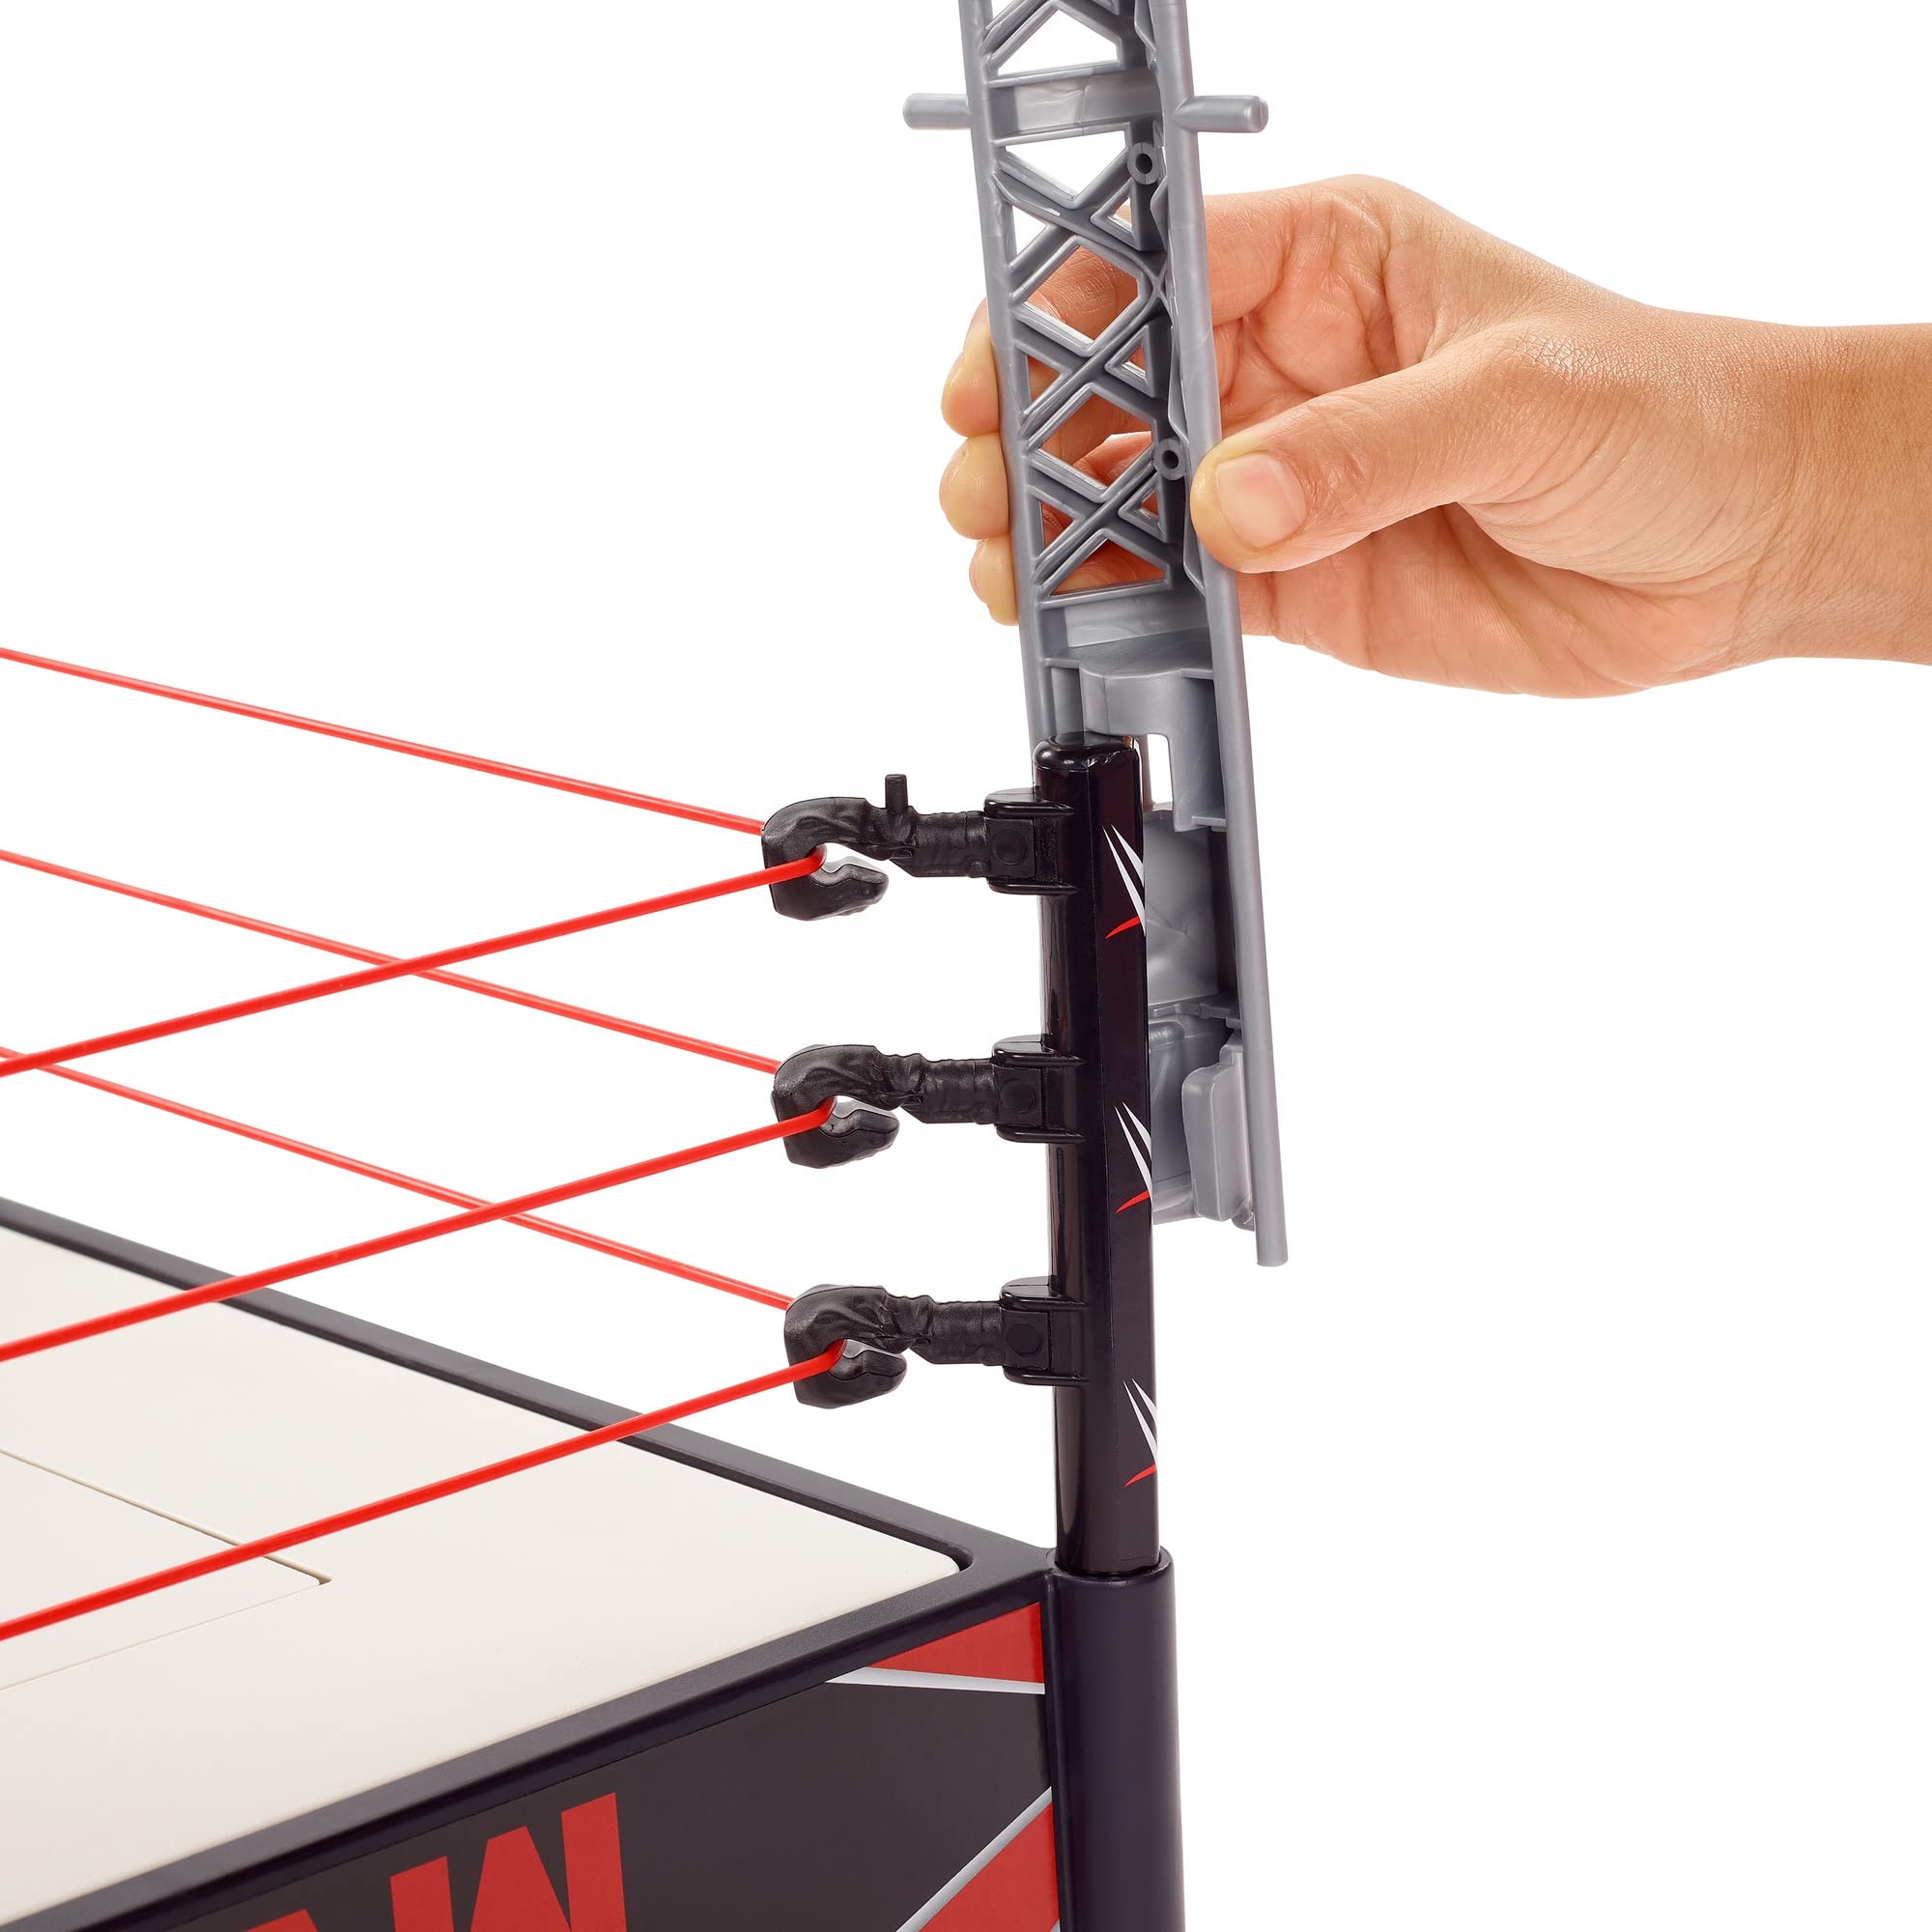 Mattel WWE Kickout Ring Wrekkin Playset with Randomized Ring Count, Springboard Launcher, Crane, WWE Championship & Accessories, 13-Inch X 20-Inch Ring, Multicolor